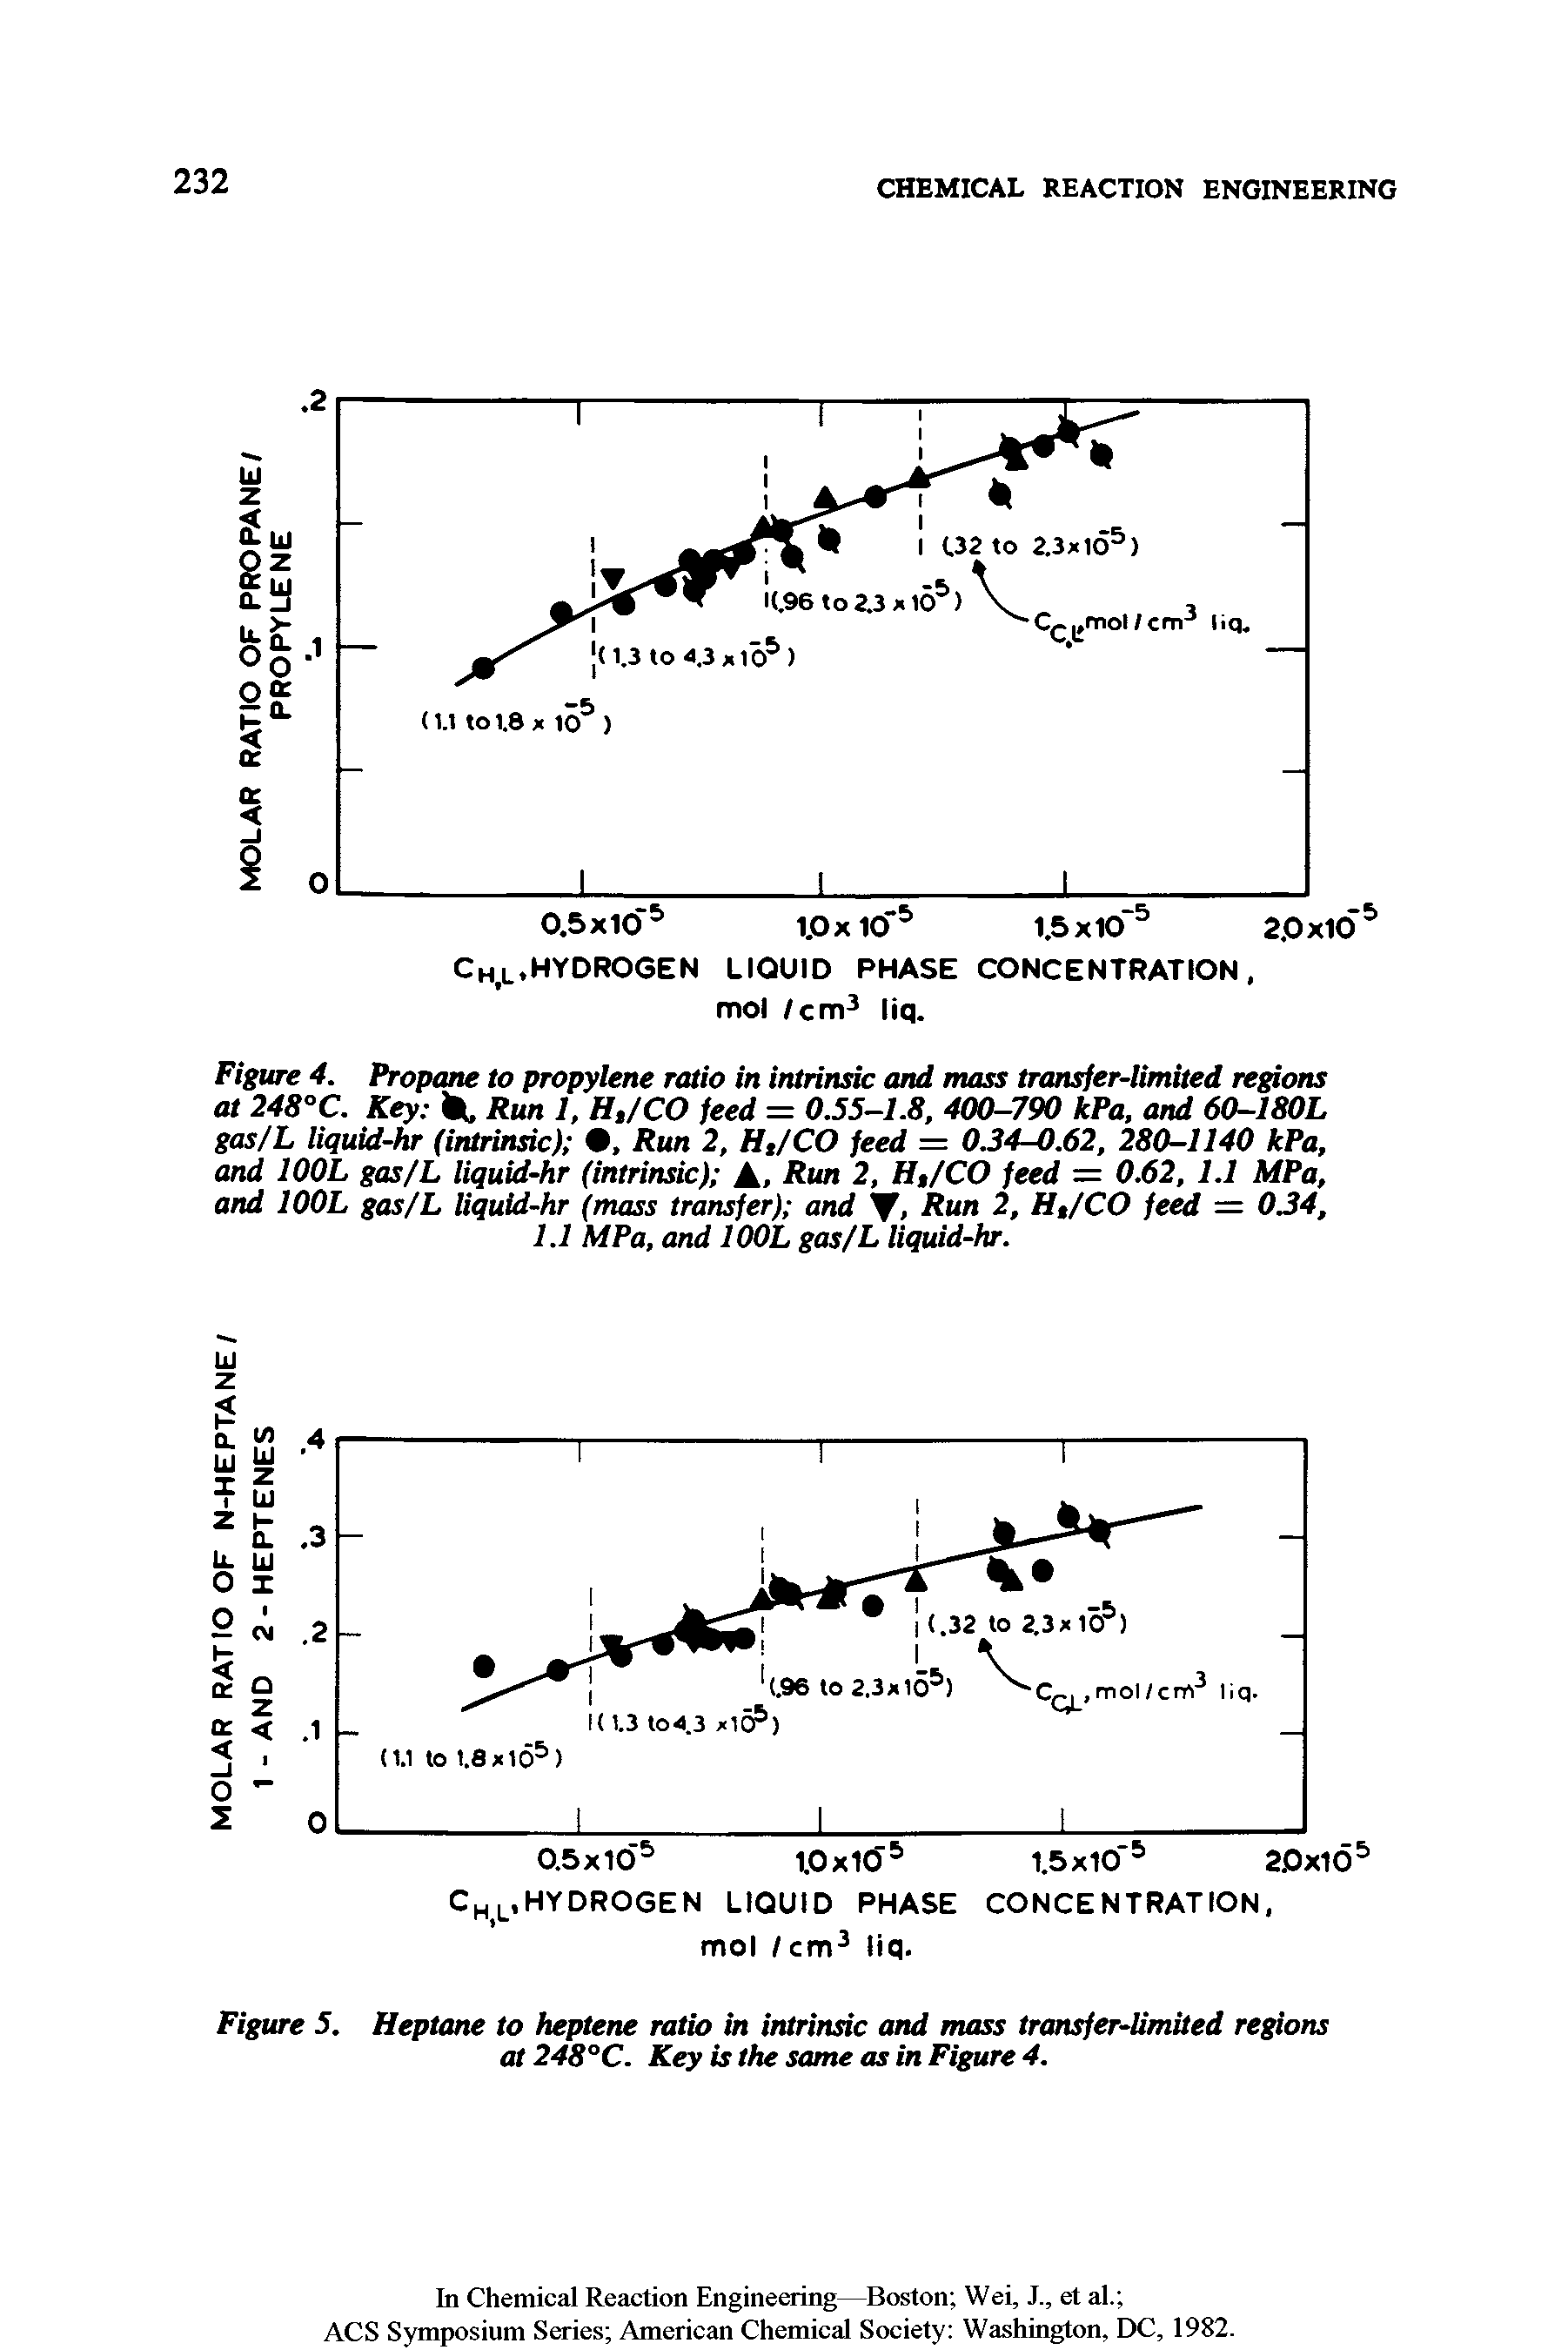 Figure 5. Heptane to heptene ratio in intrinsic and mass transfer-limited regions at 248°C. Key is the same as in Figure 4.